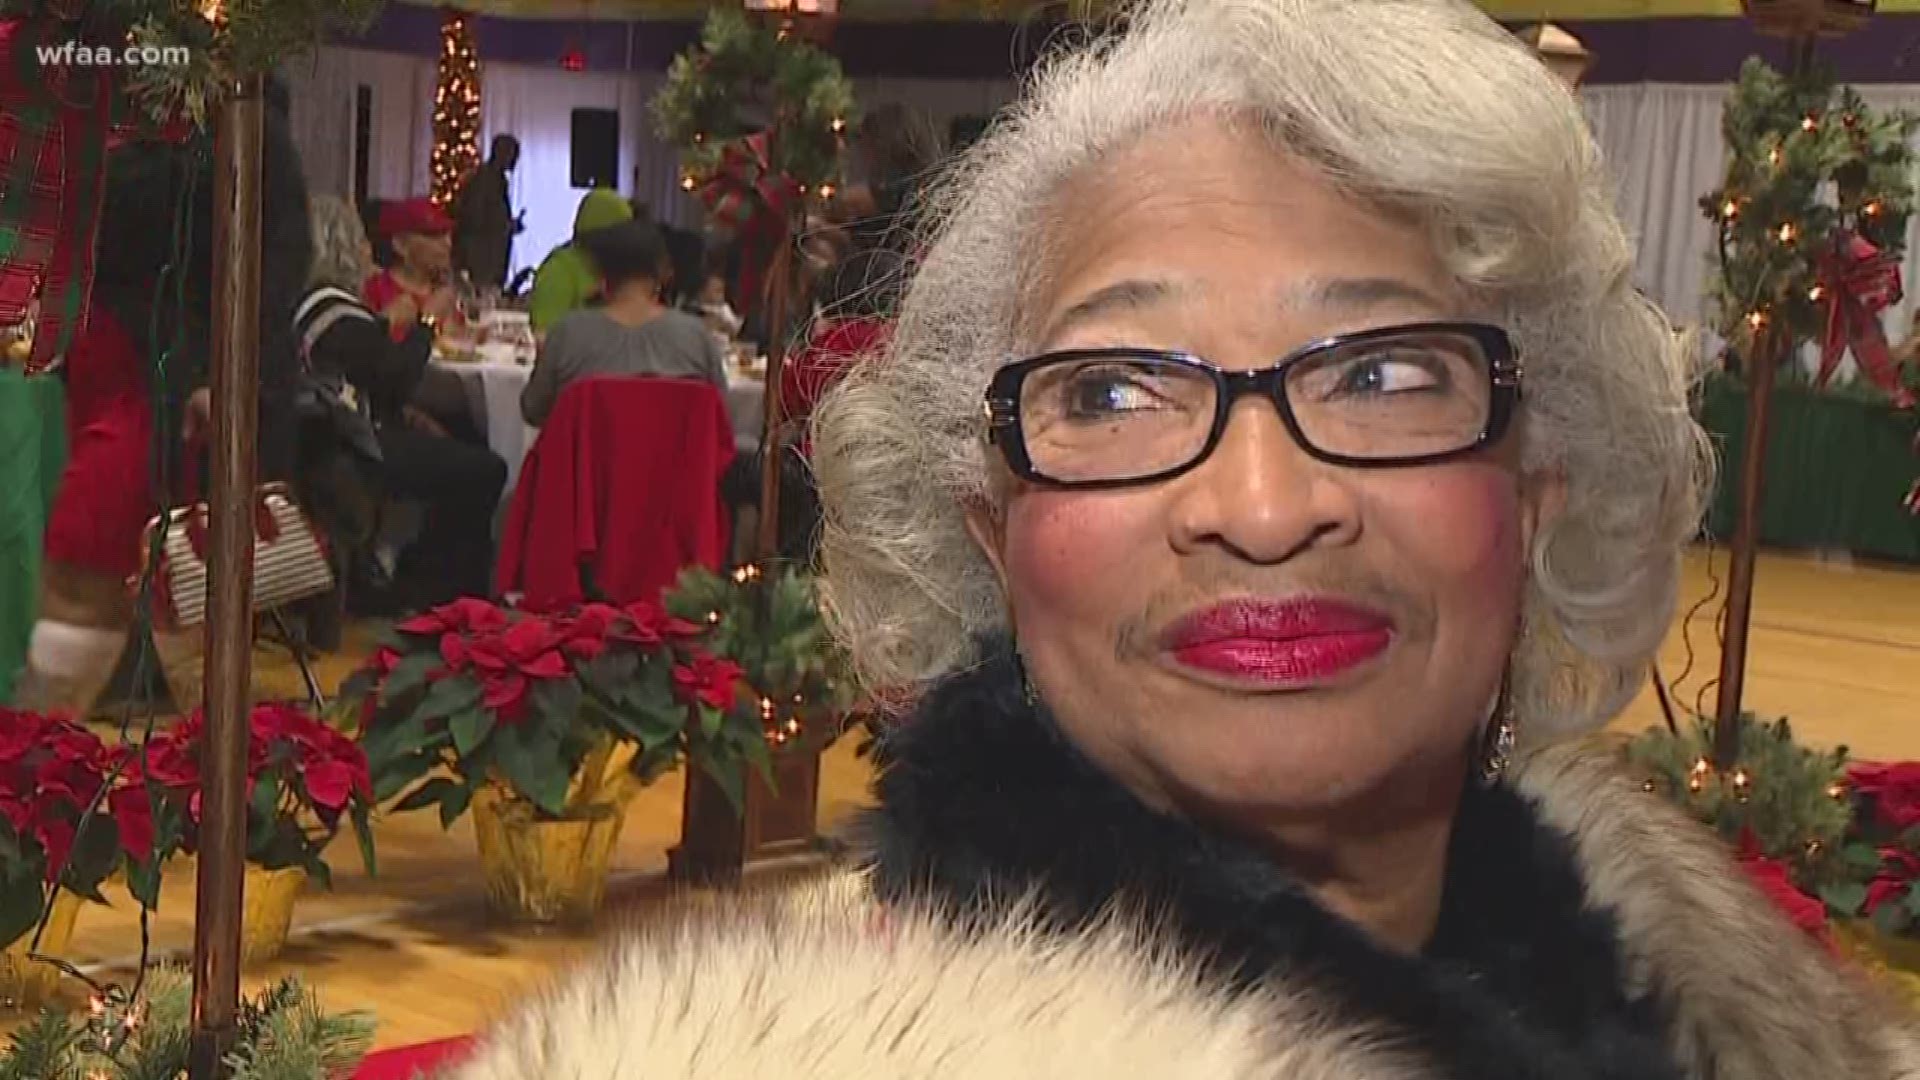 Hundreds gather for 10th Annual Home for the Holidays Celebration